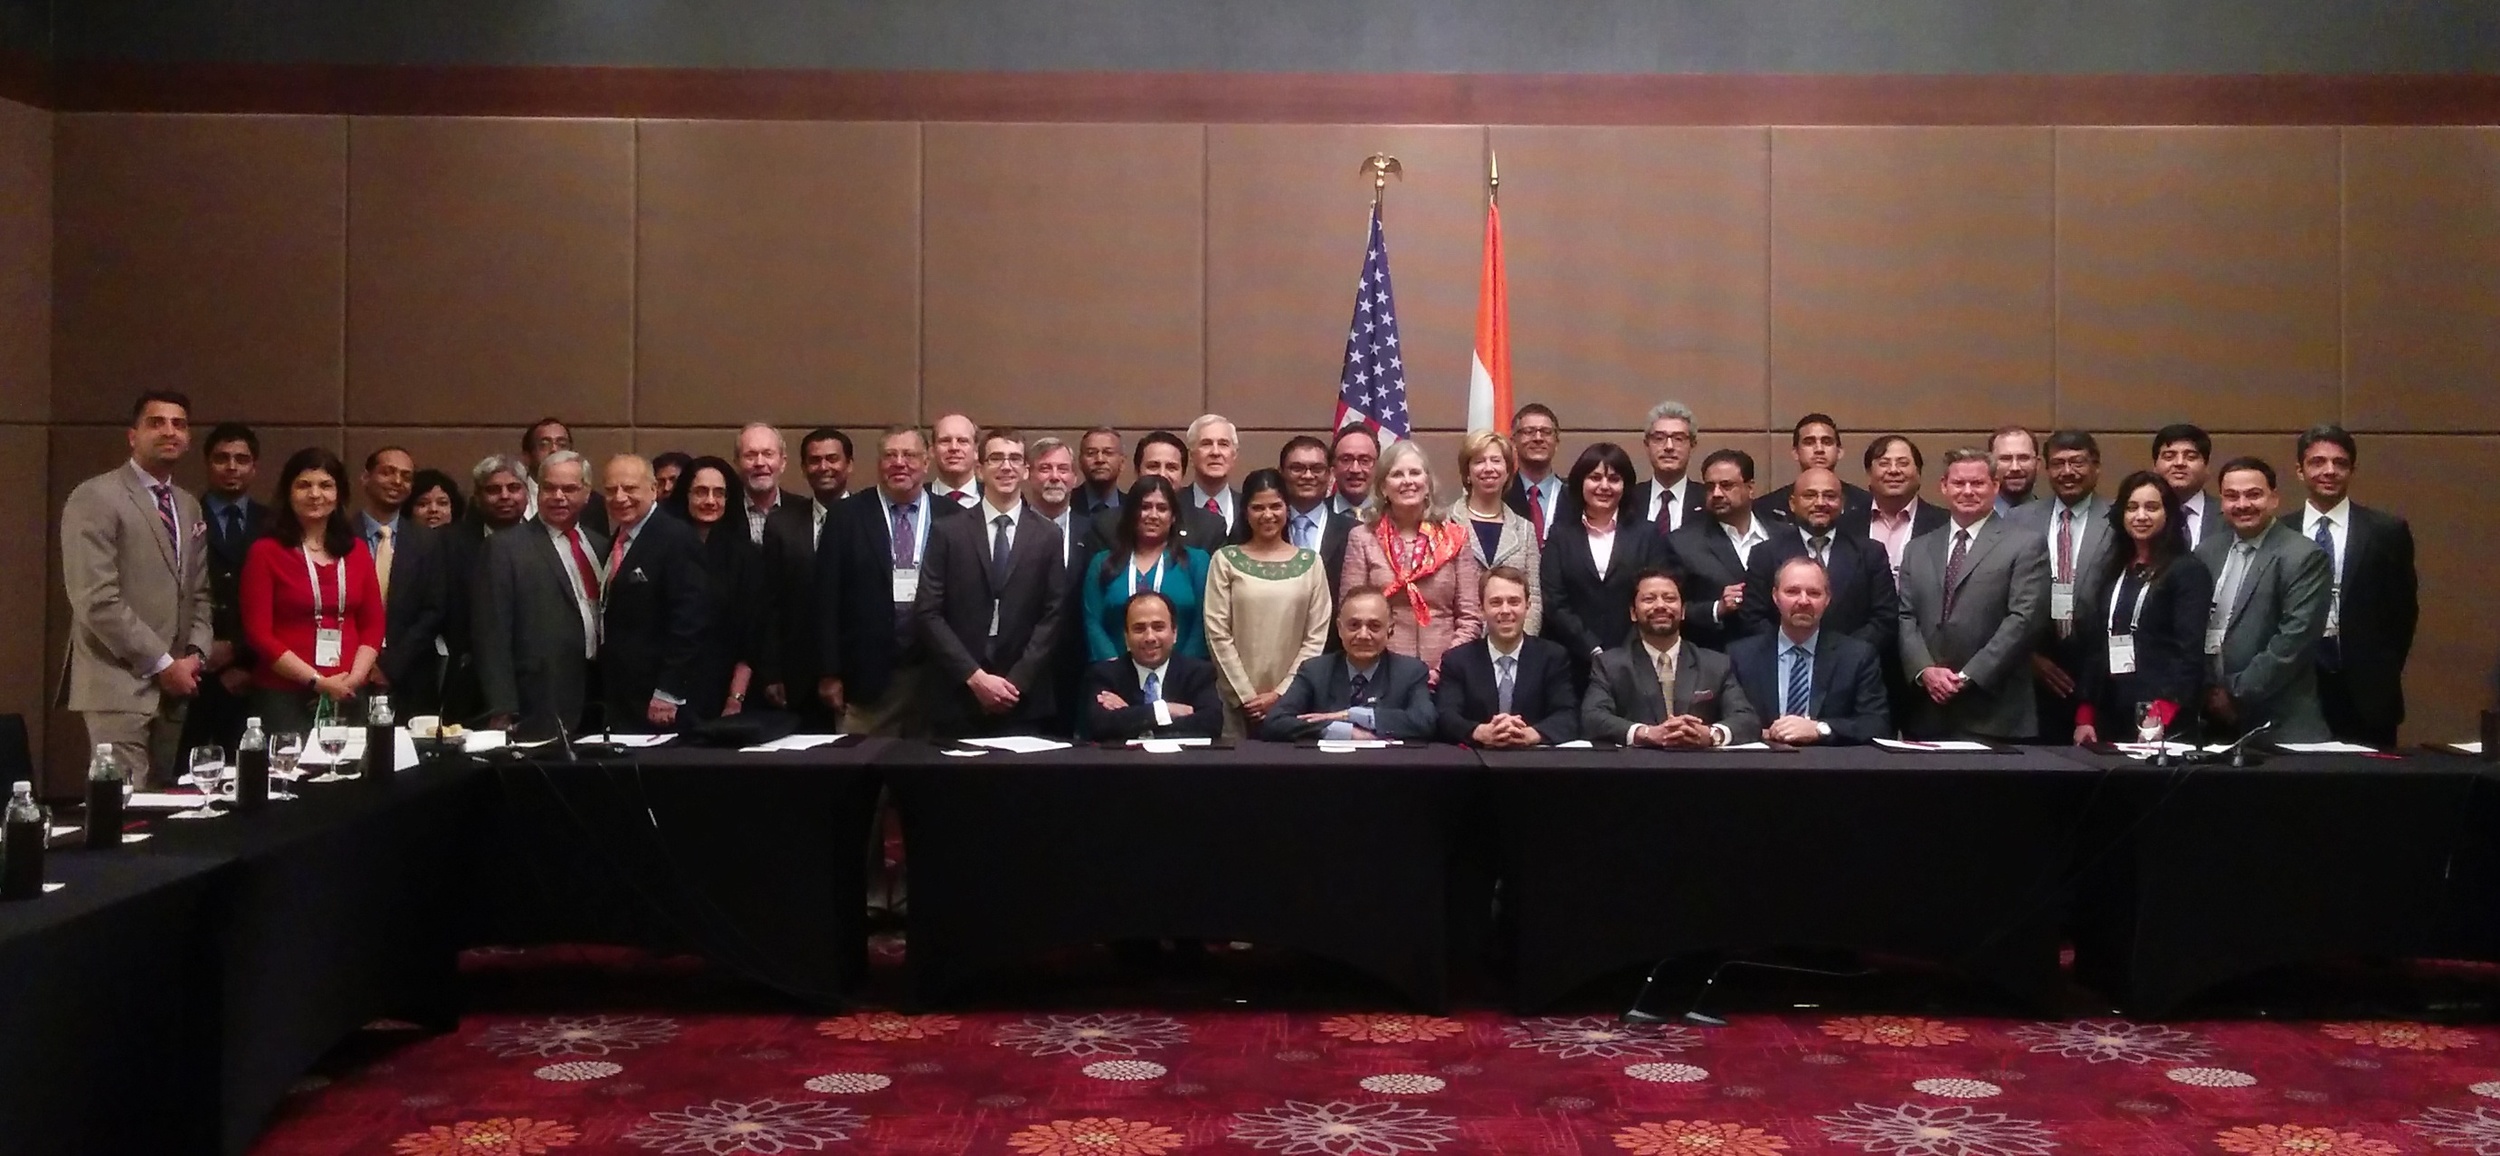 Group Photograph: The USIBC (US-India Business Council) Delegation to Vibrant Gujurat, India - January 11th & 12th, 2015